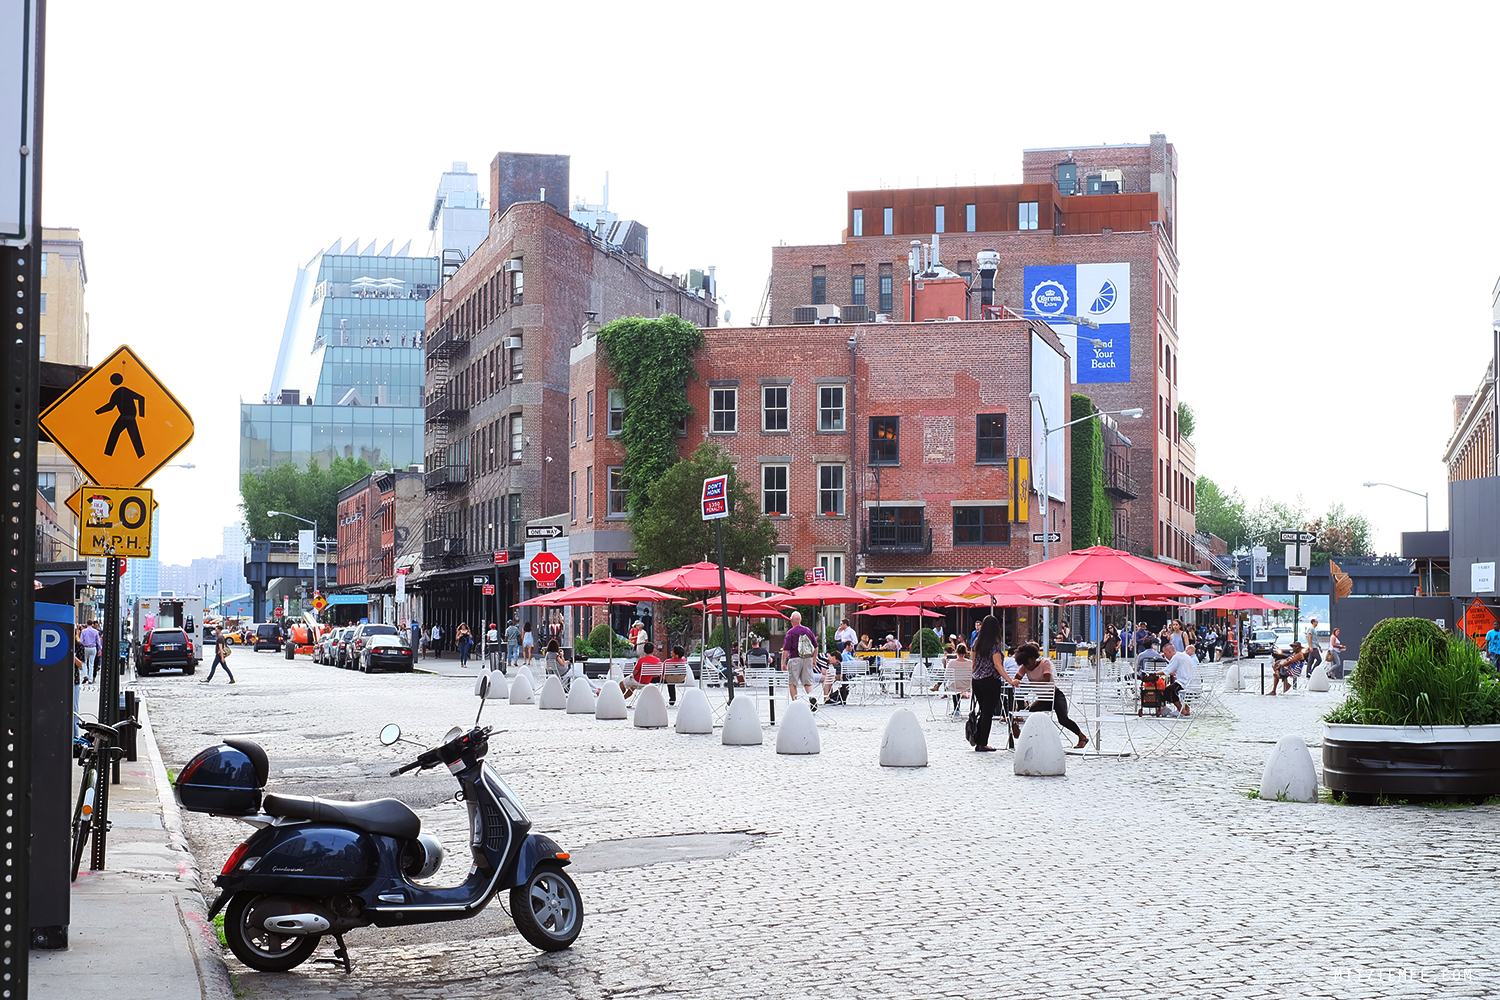 Meatpacking District, New York